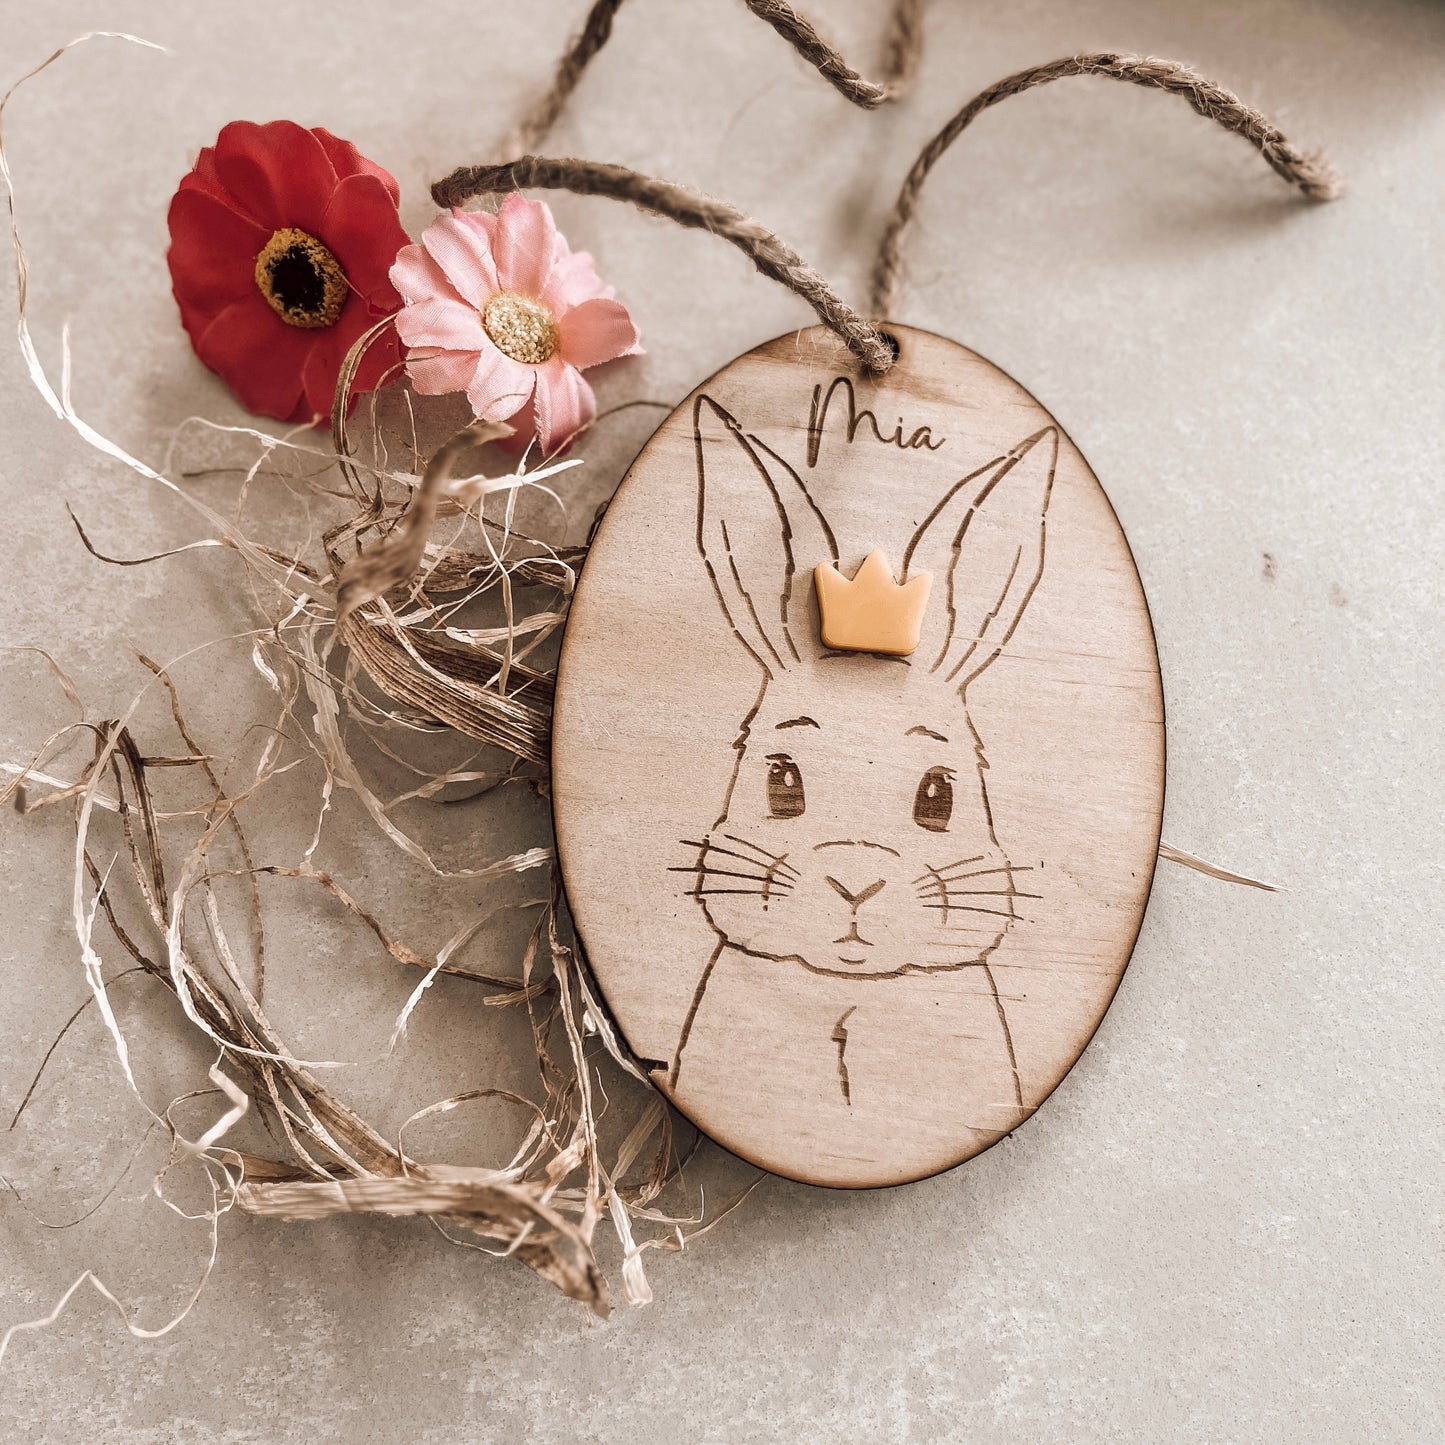 The Easter Tag